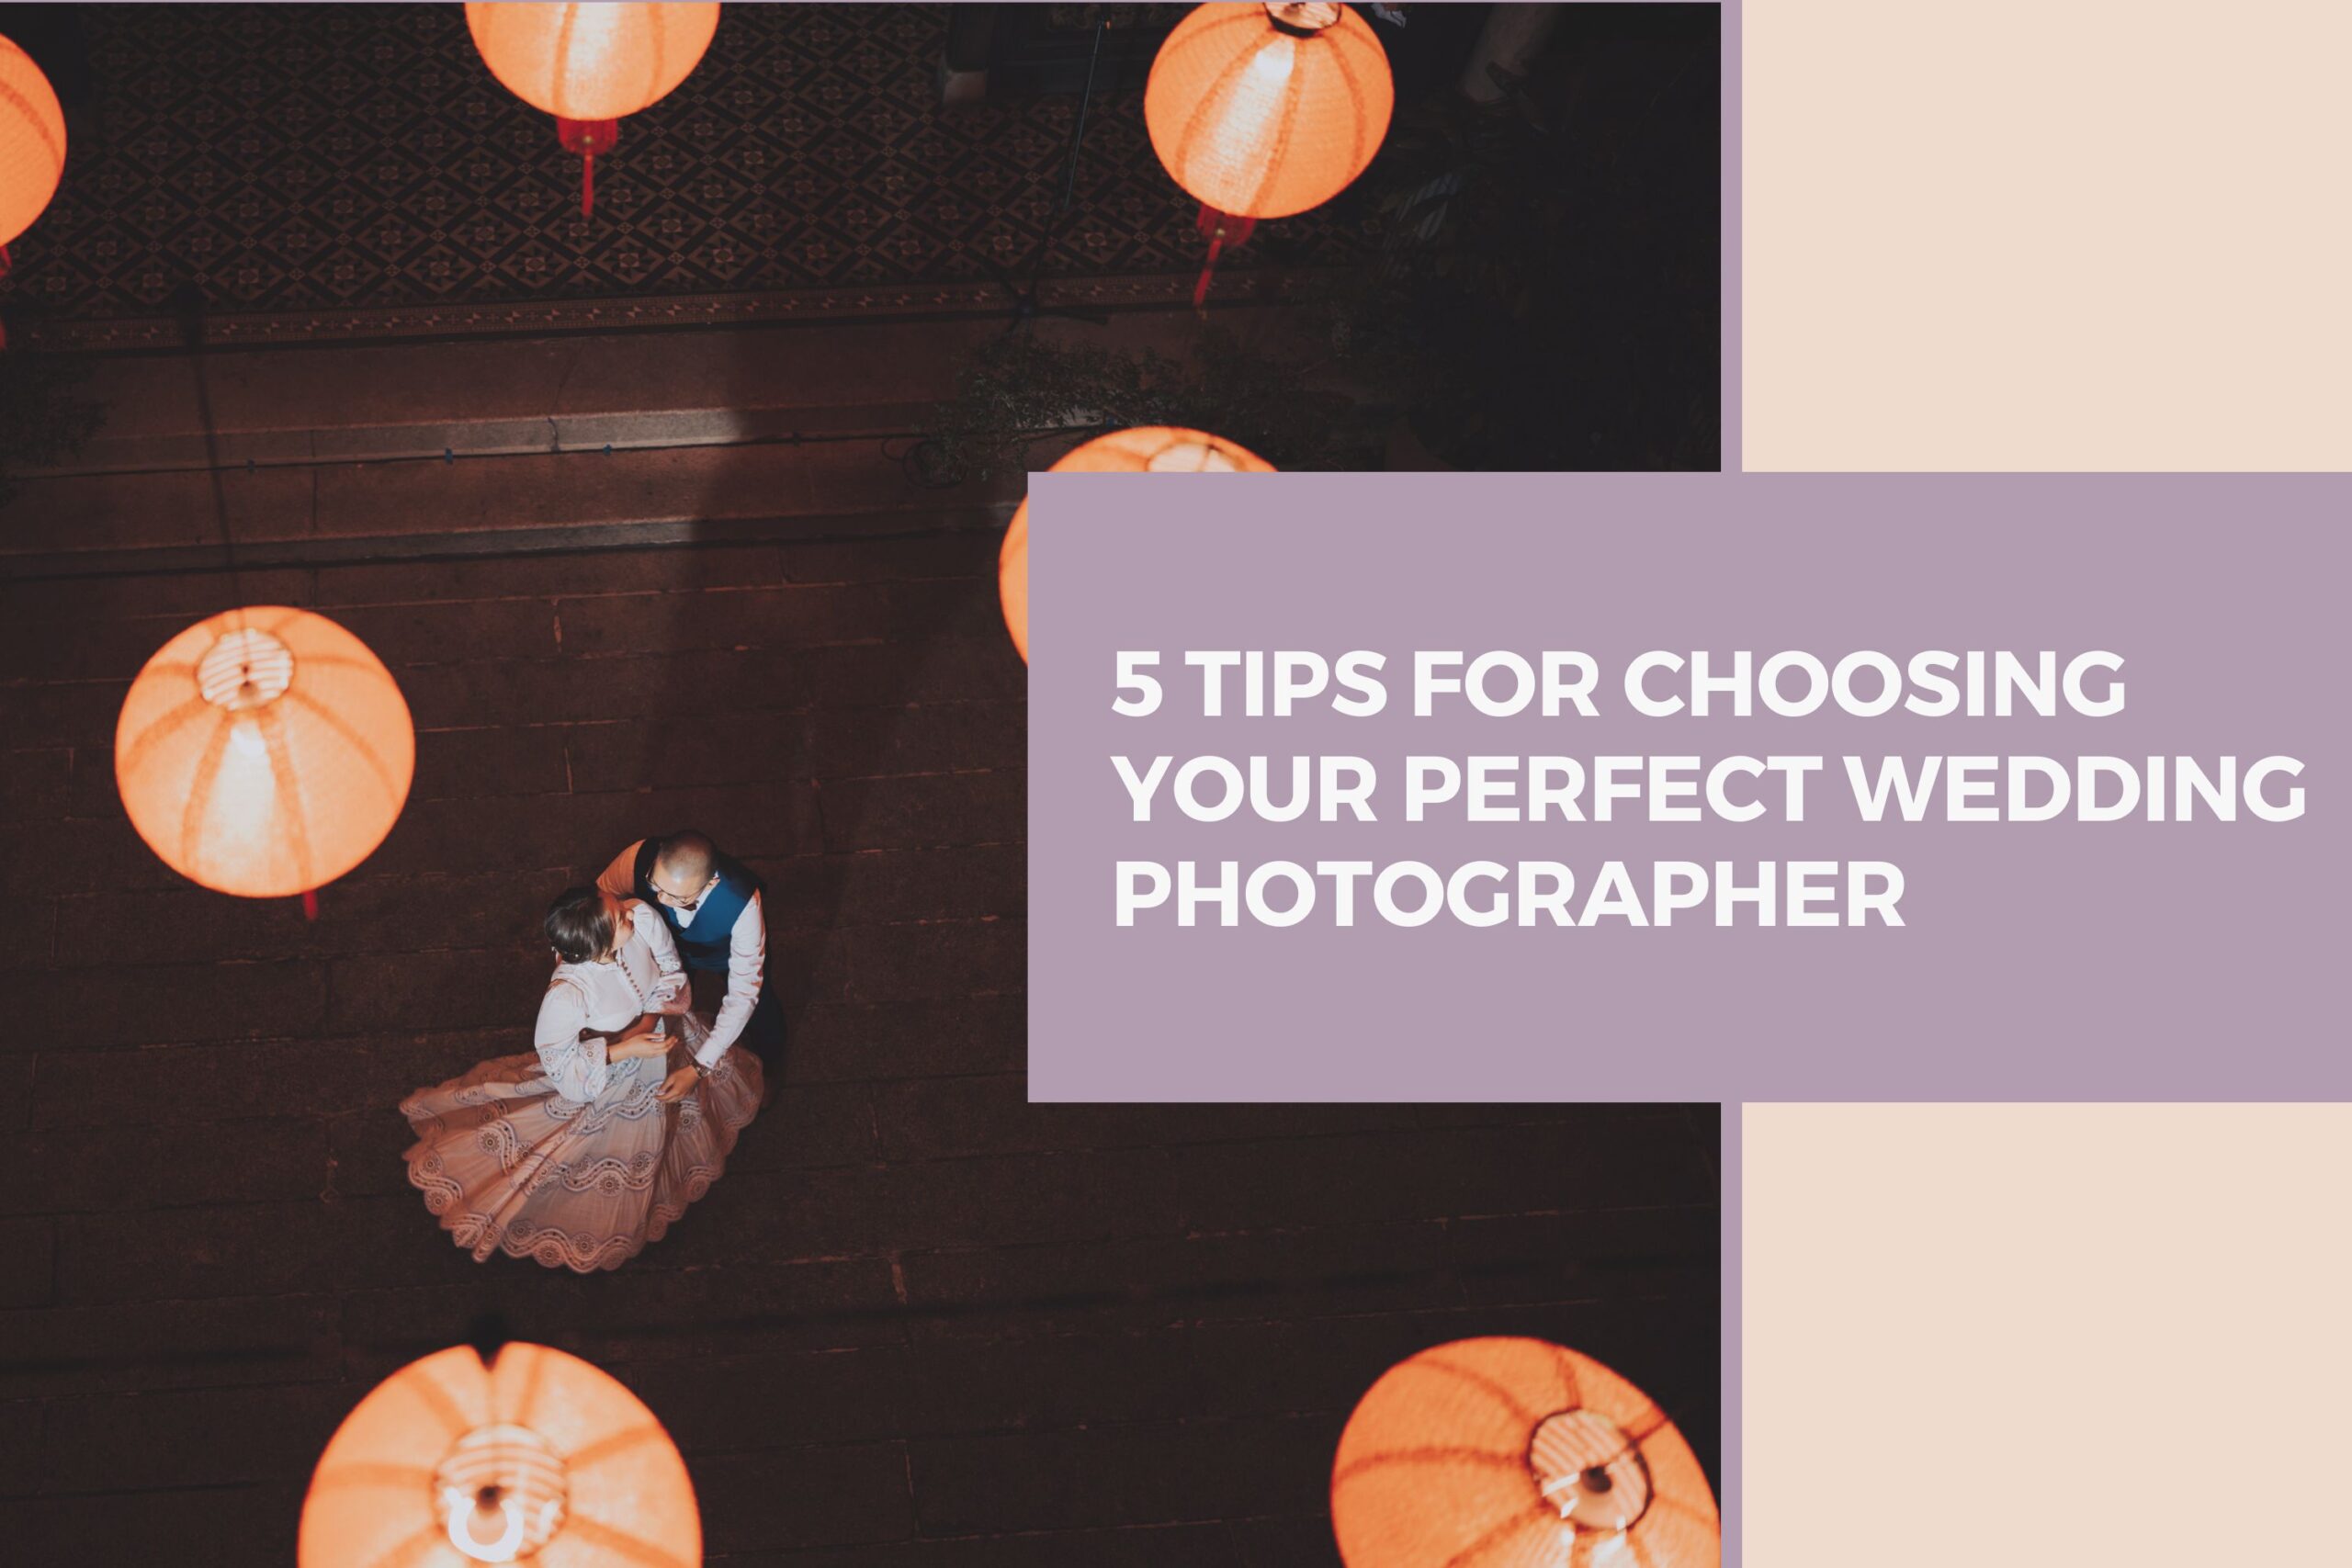 5 Tips for Choosing Your Perfect Wedding Photographer